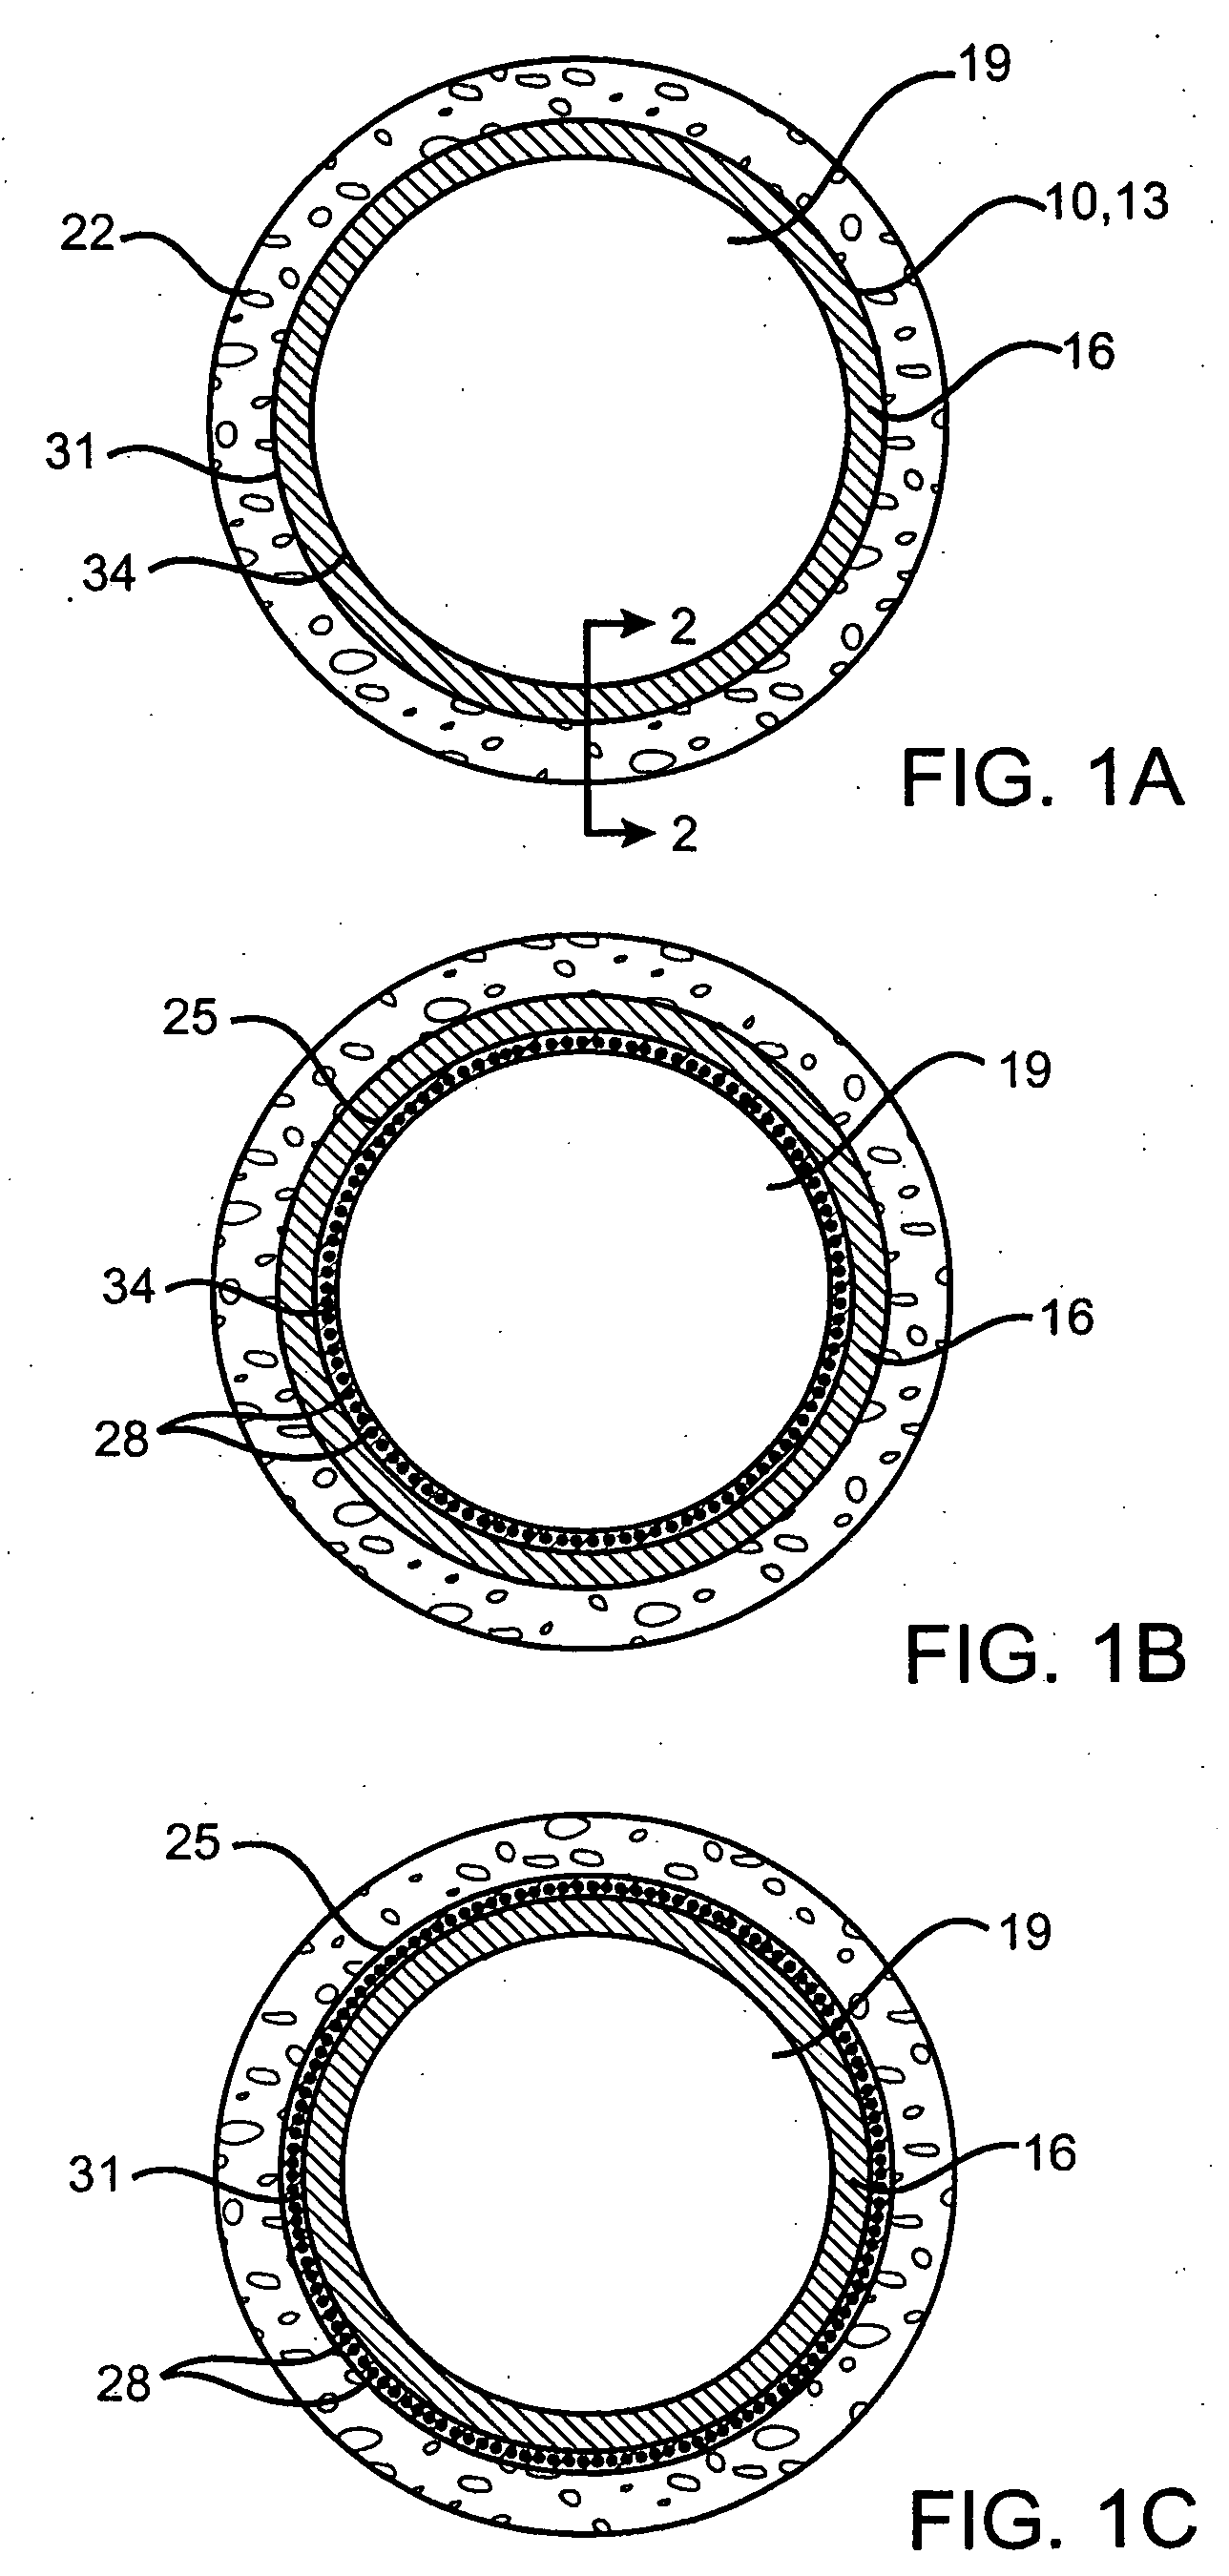 Devices delivering therapeutic agents and methods regarding the same